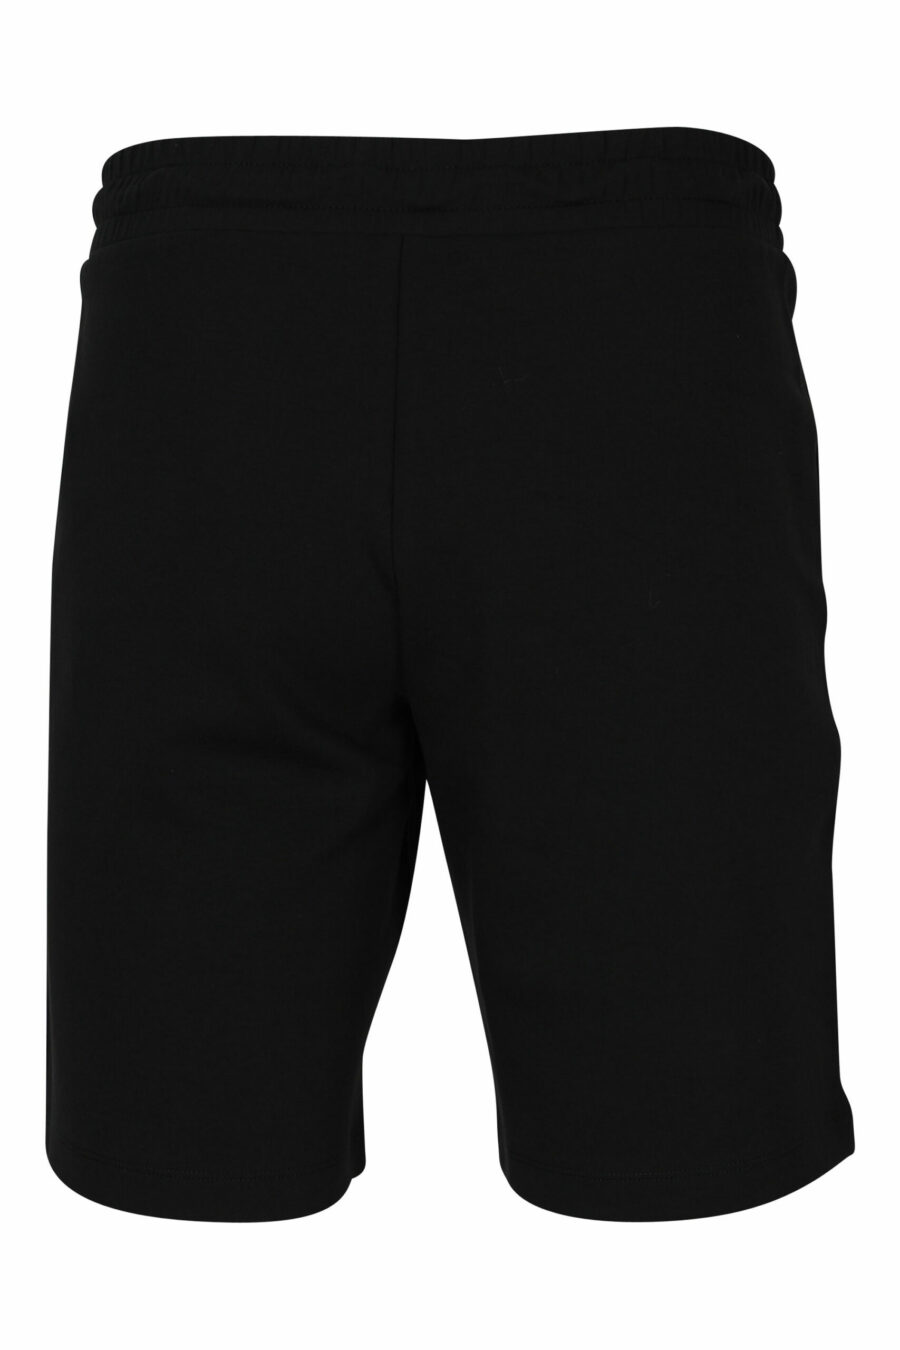 Tracksuit bottoms black shorts with white "lux identity" minilogue on black plate - 107532 scaled